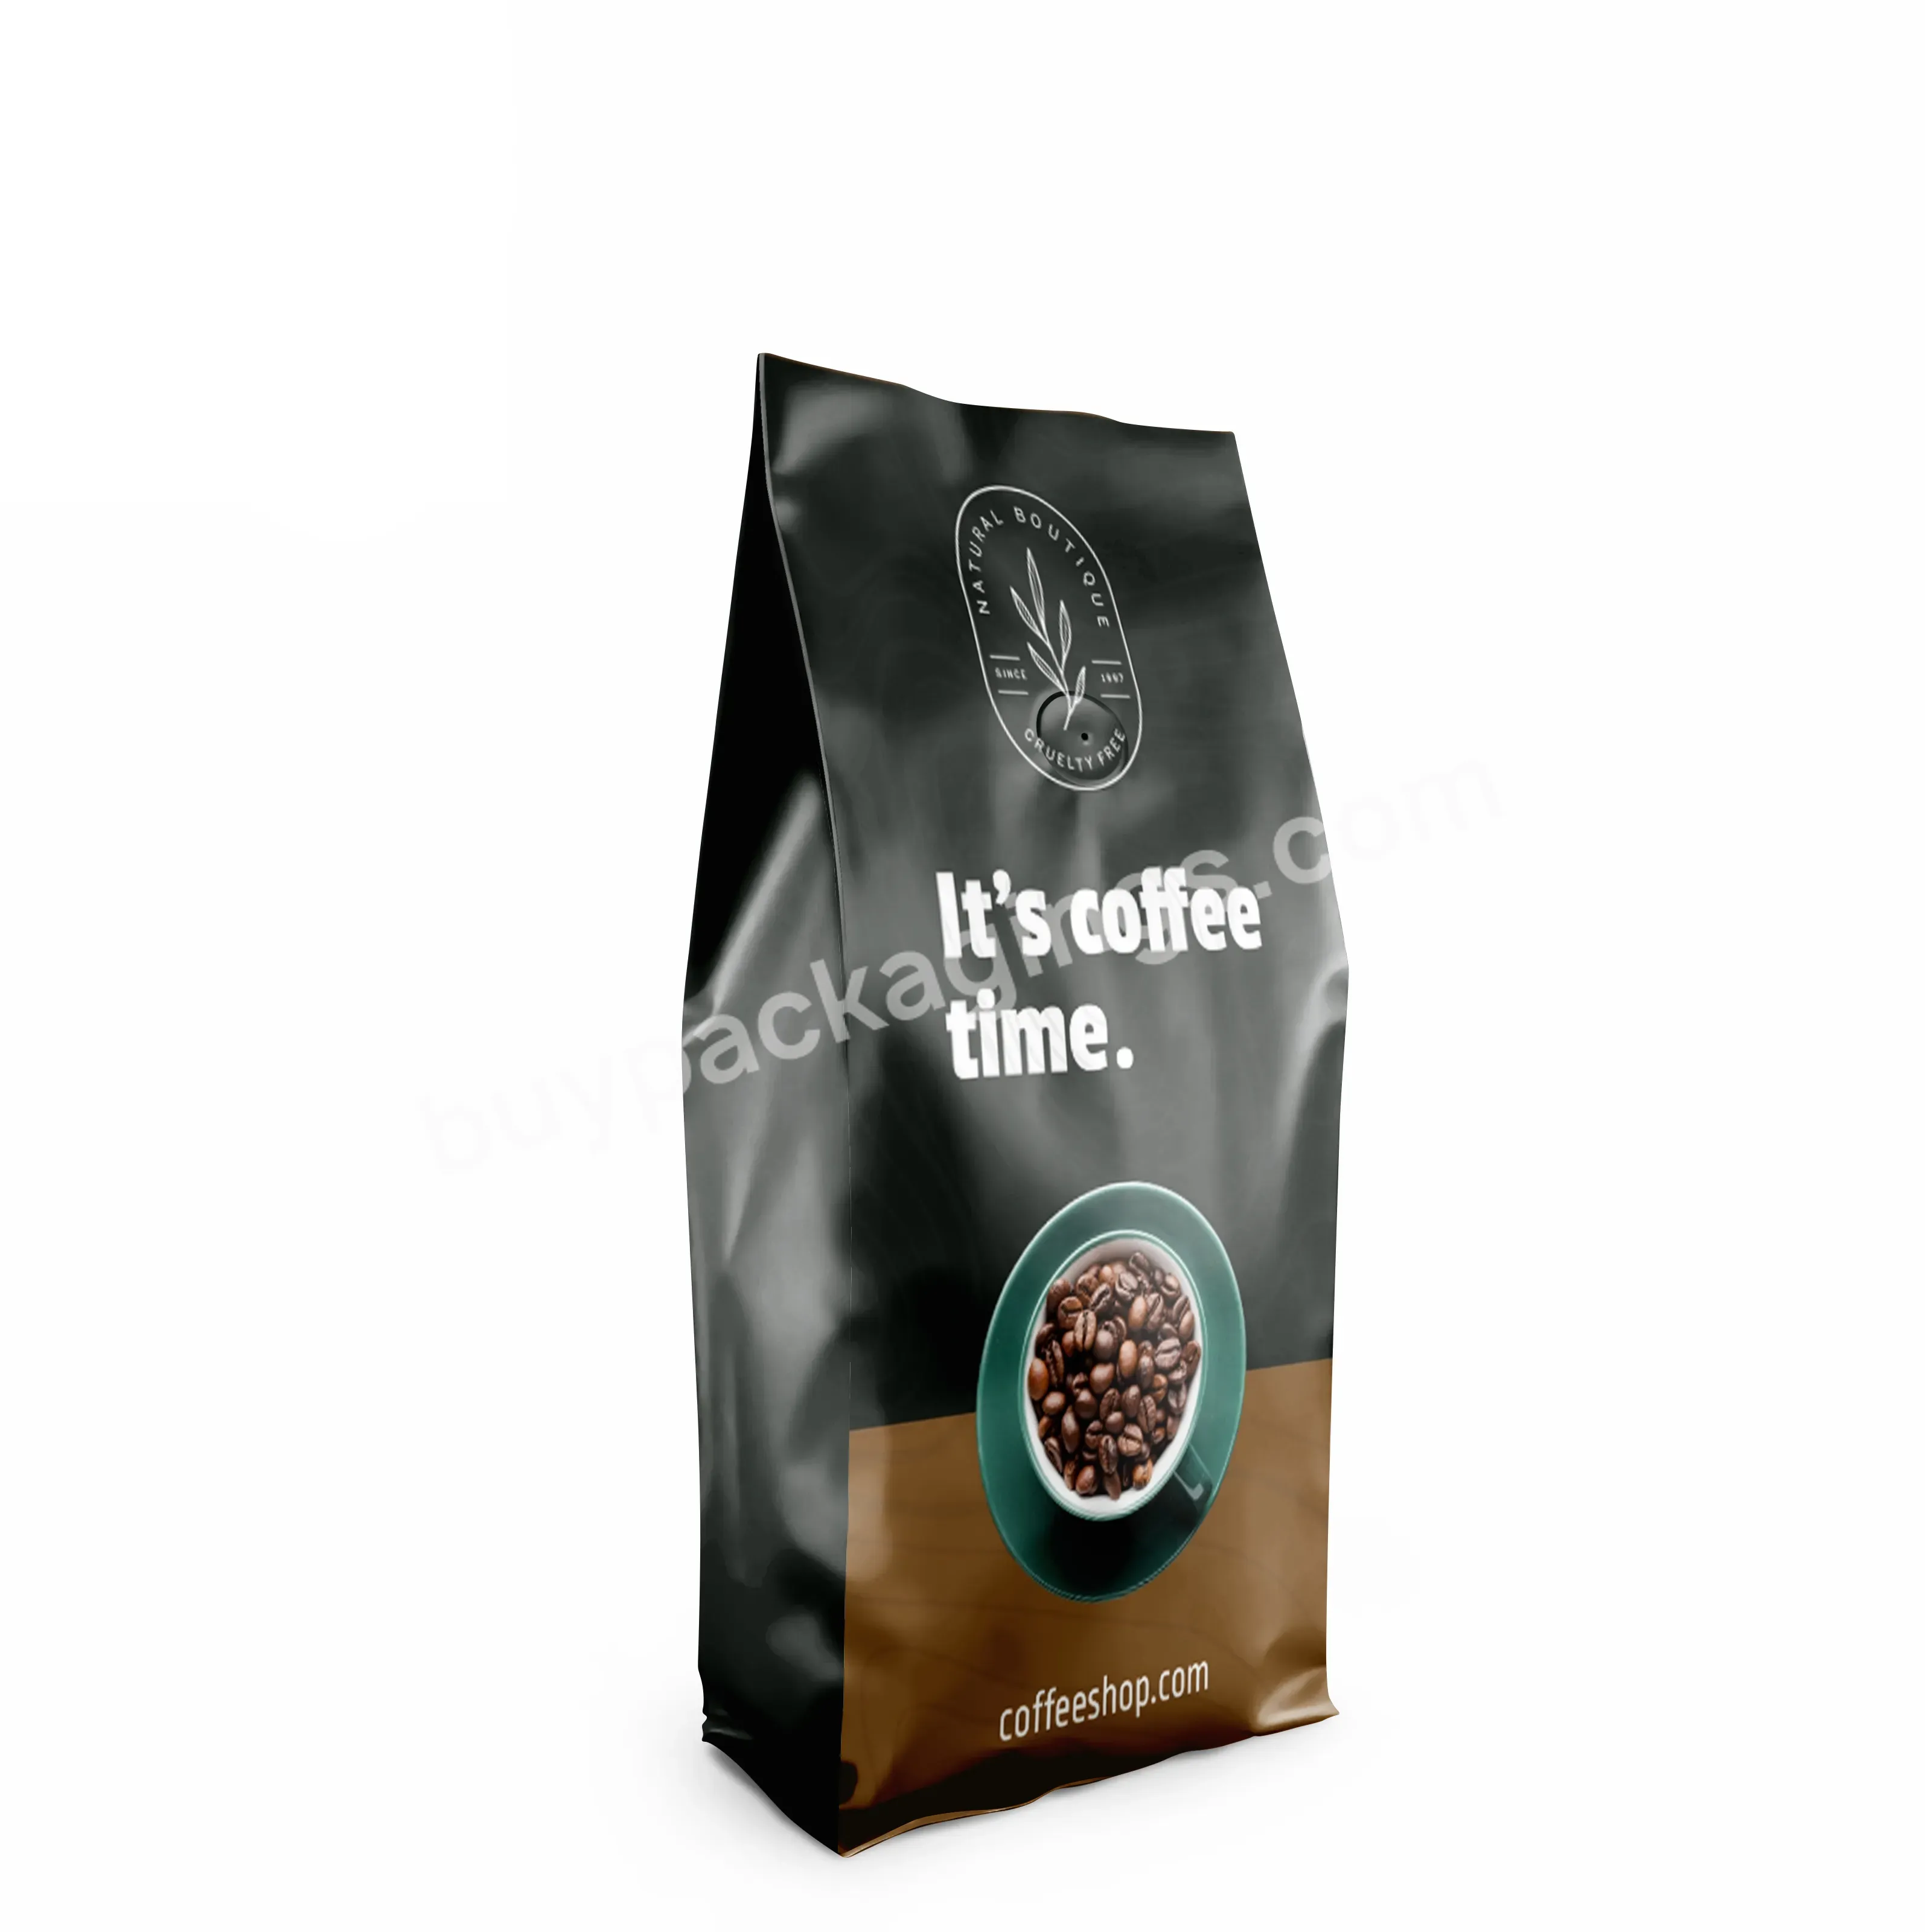 Aluminum Foil 250g 500g 1kg Coffee Roll Bags With Valve Custom Print Water Proof Coffee Side Gusset Bag - Buy Coffee Gusset Bag,Coffee Roll Bags,Coffee Bag With Valve 1kg.